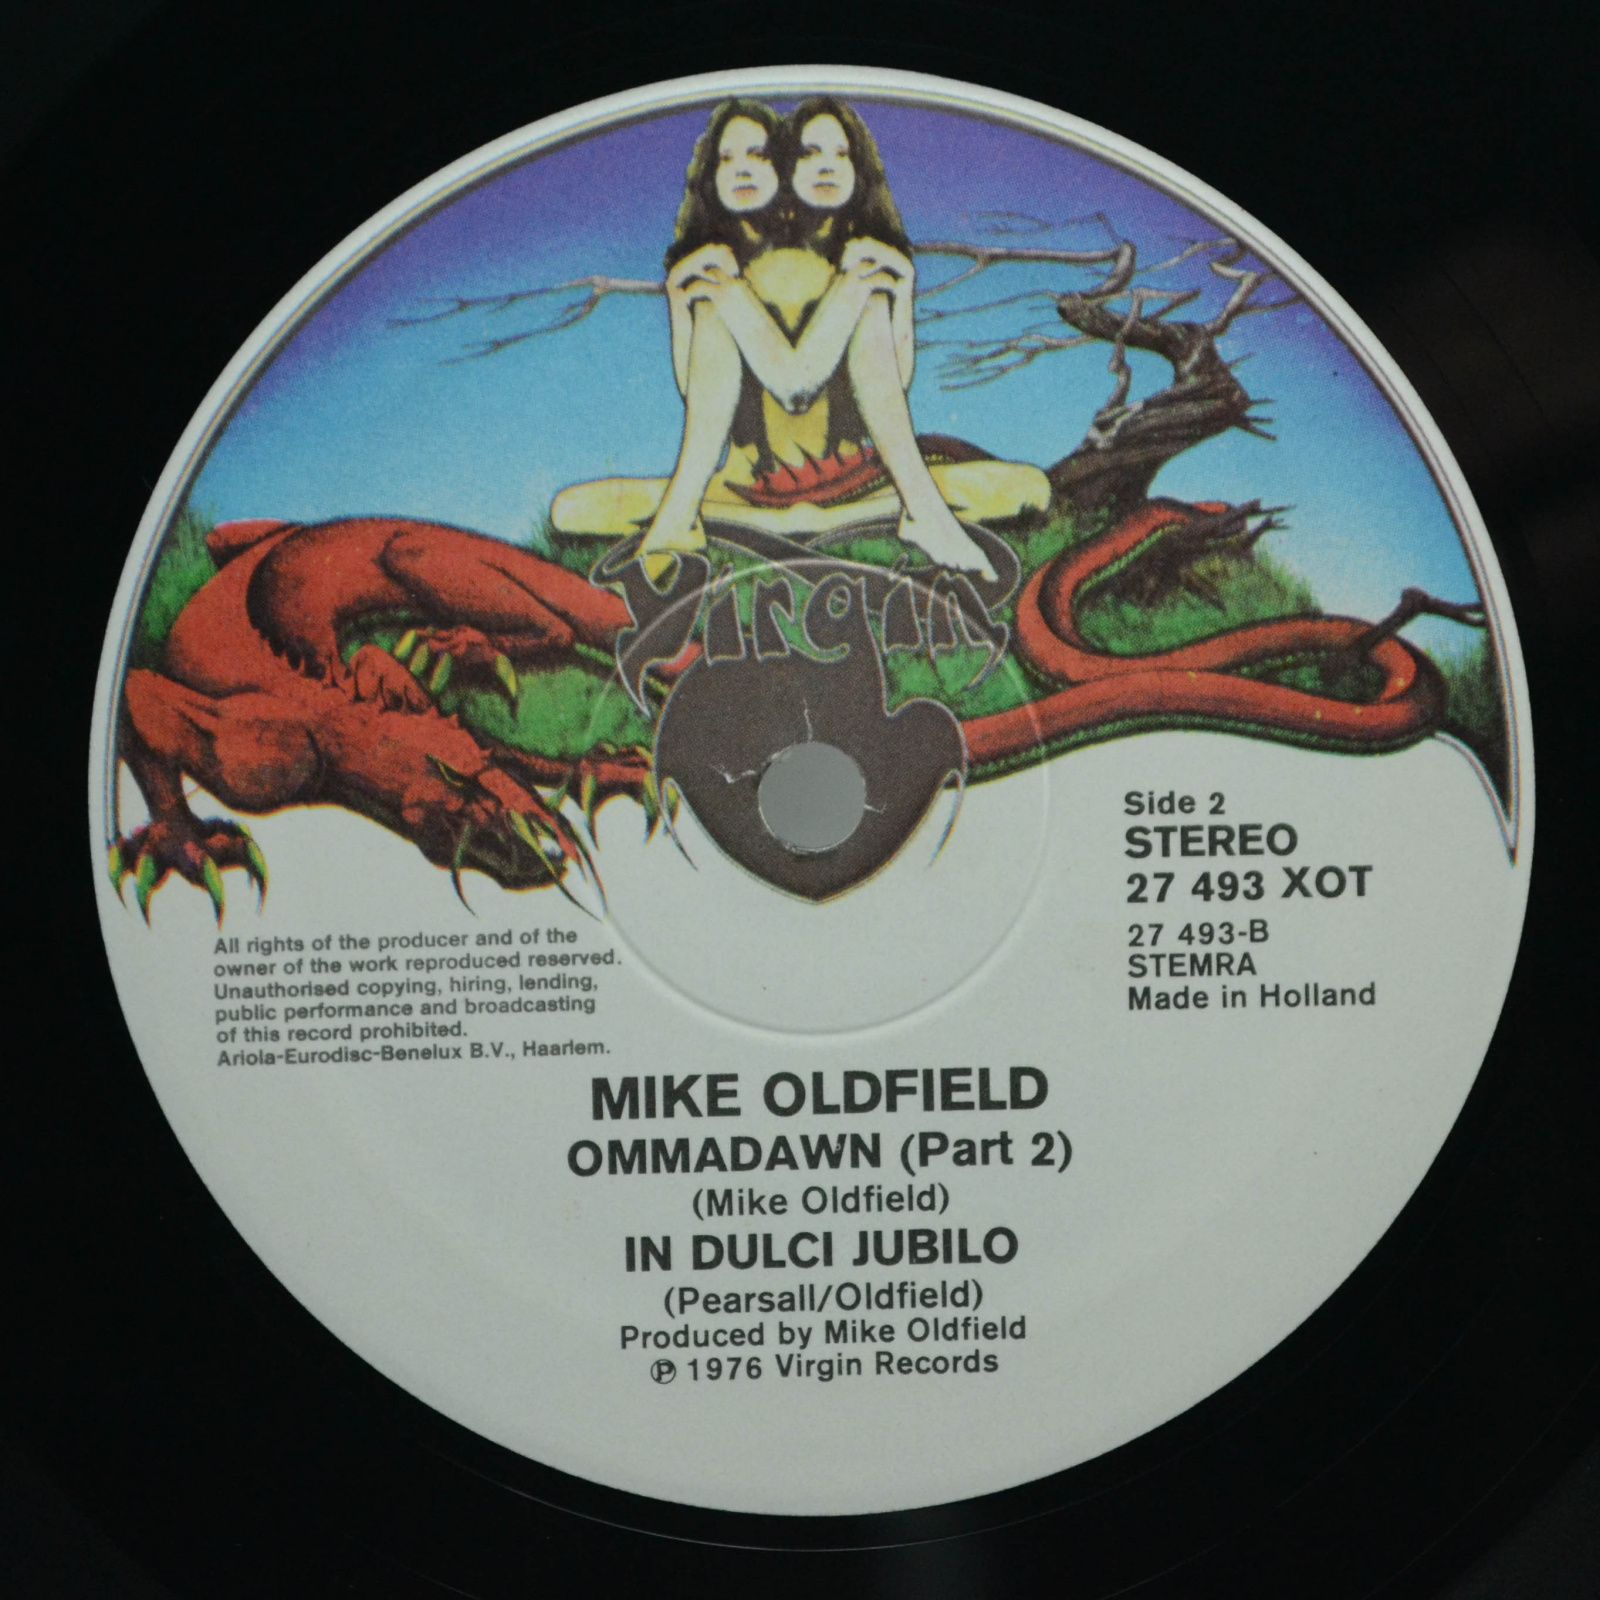 Mike Oldfield — Ommadawn, 1975